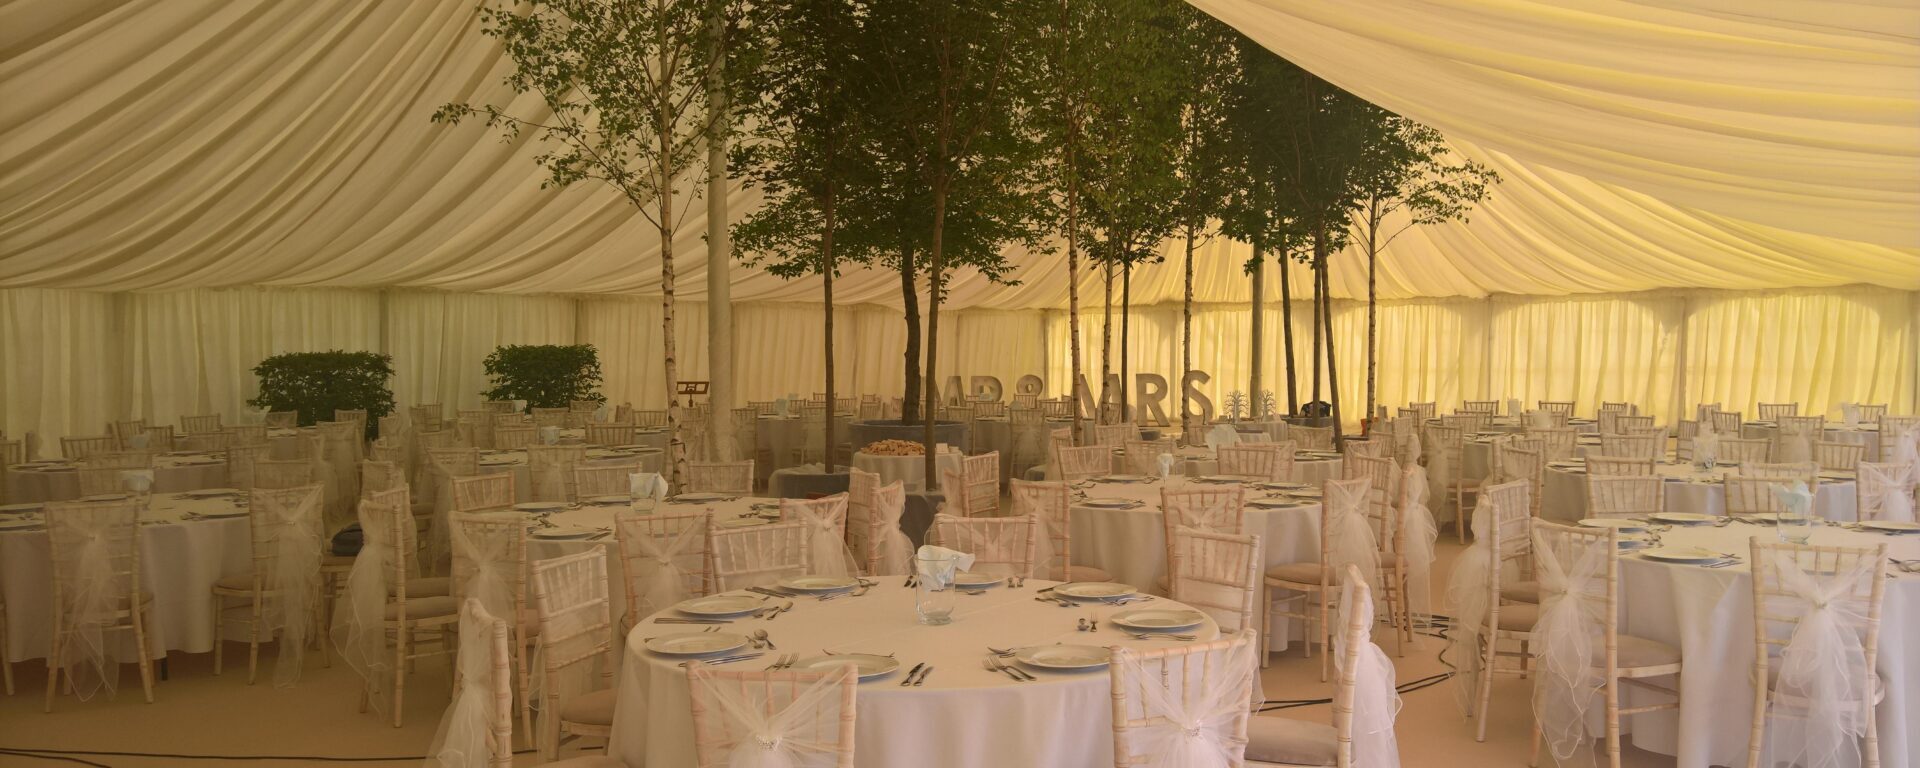 marquee hire Derby service in all areas of Derby city and county